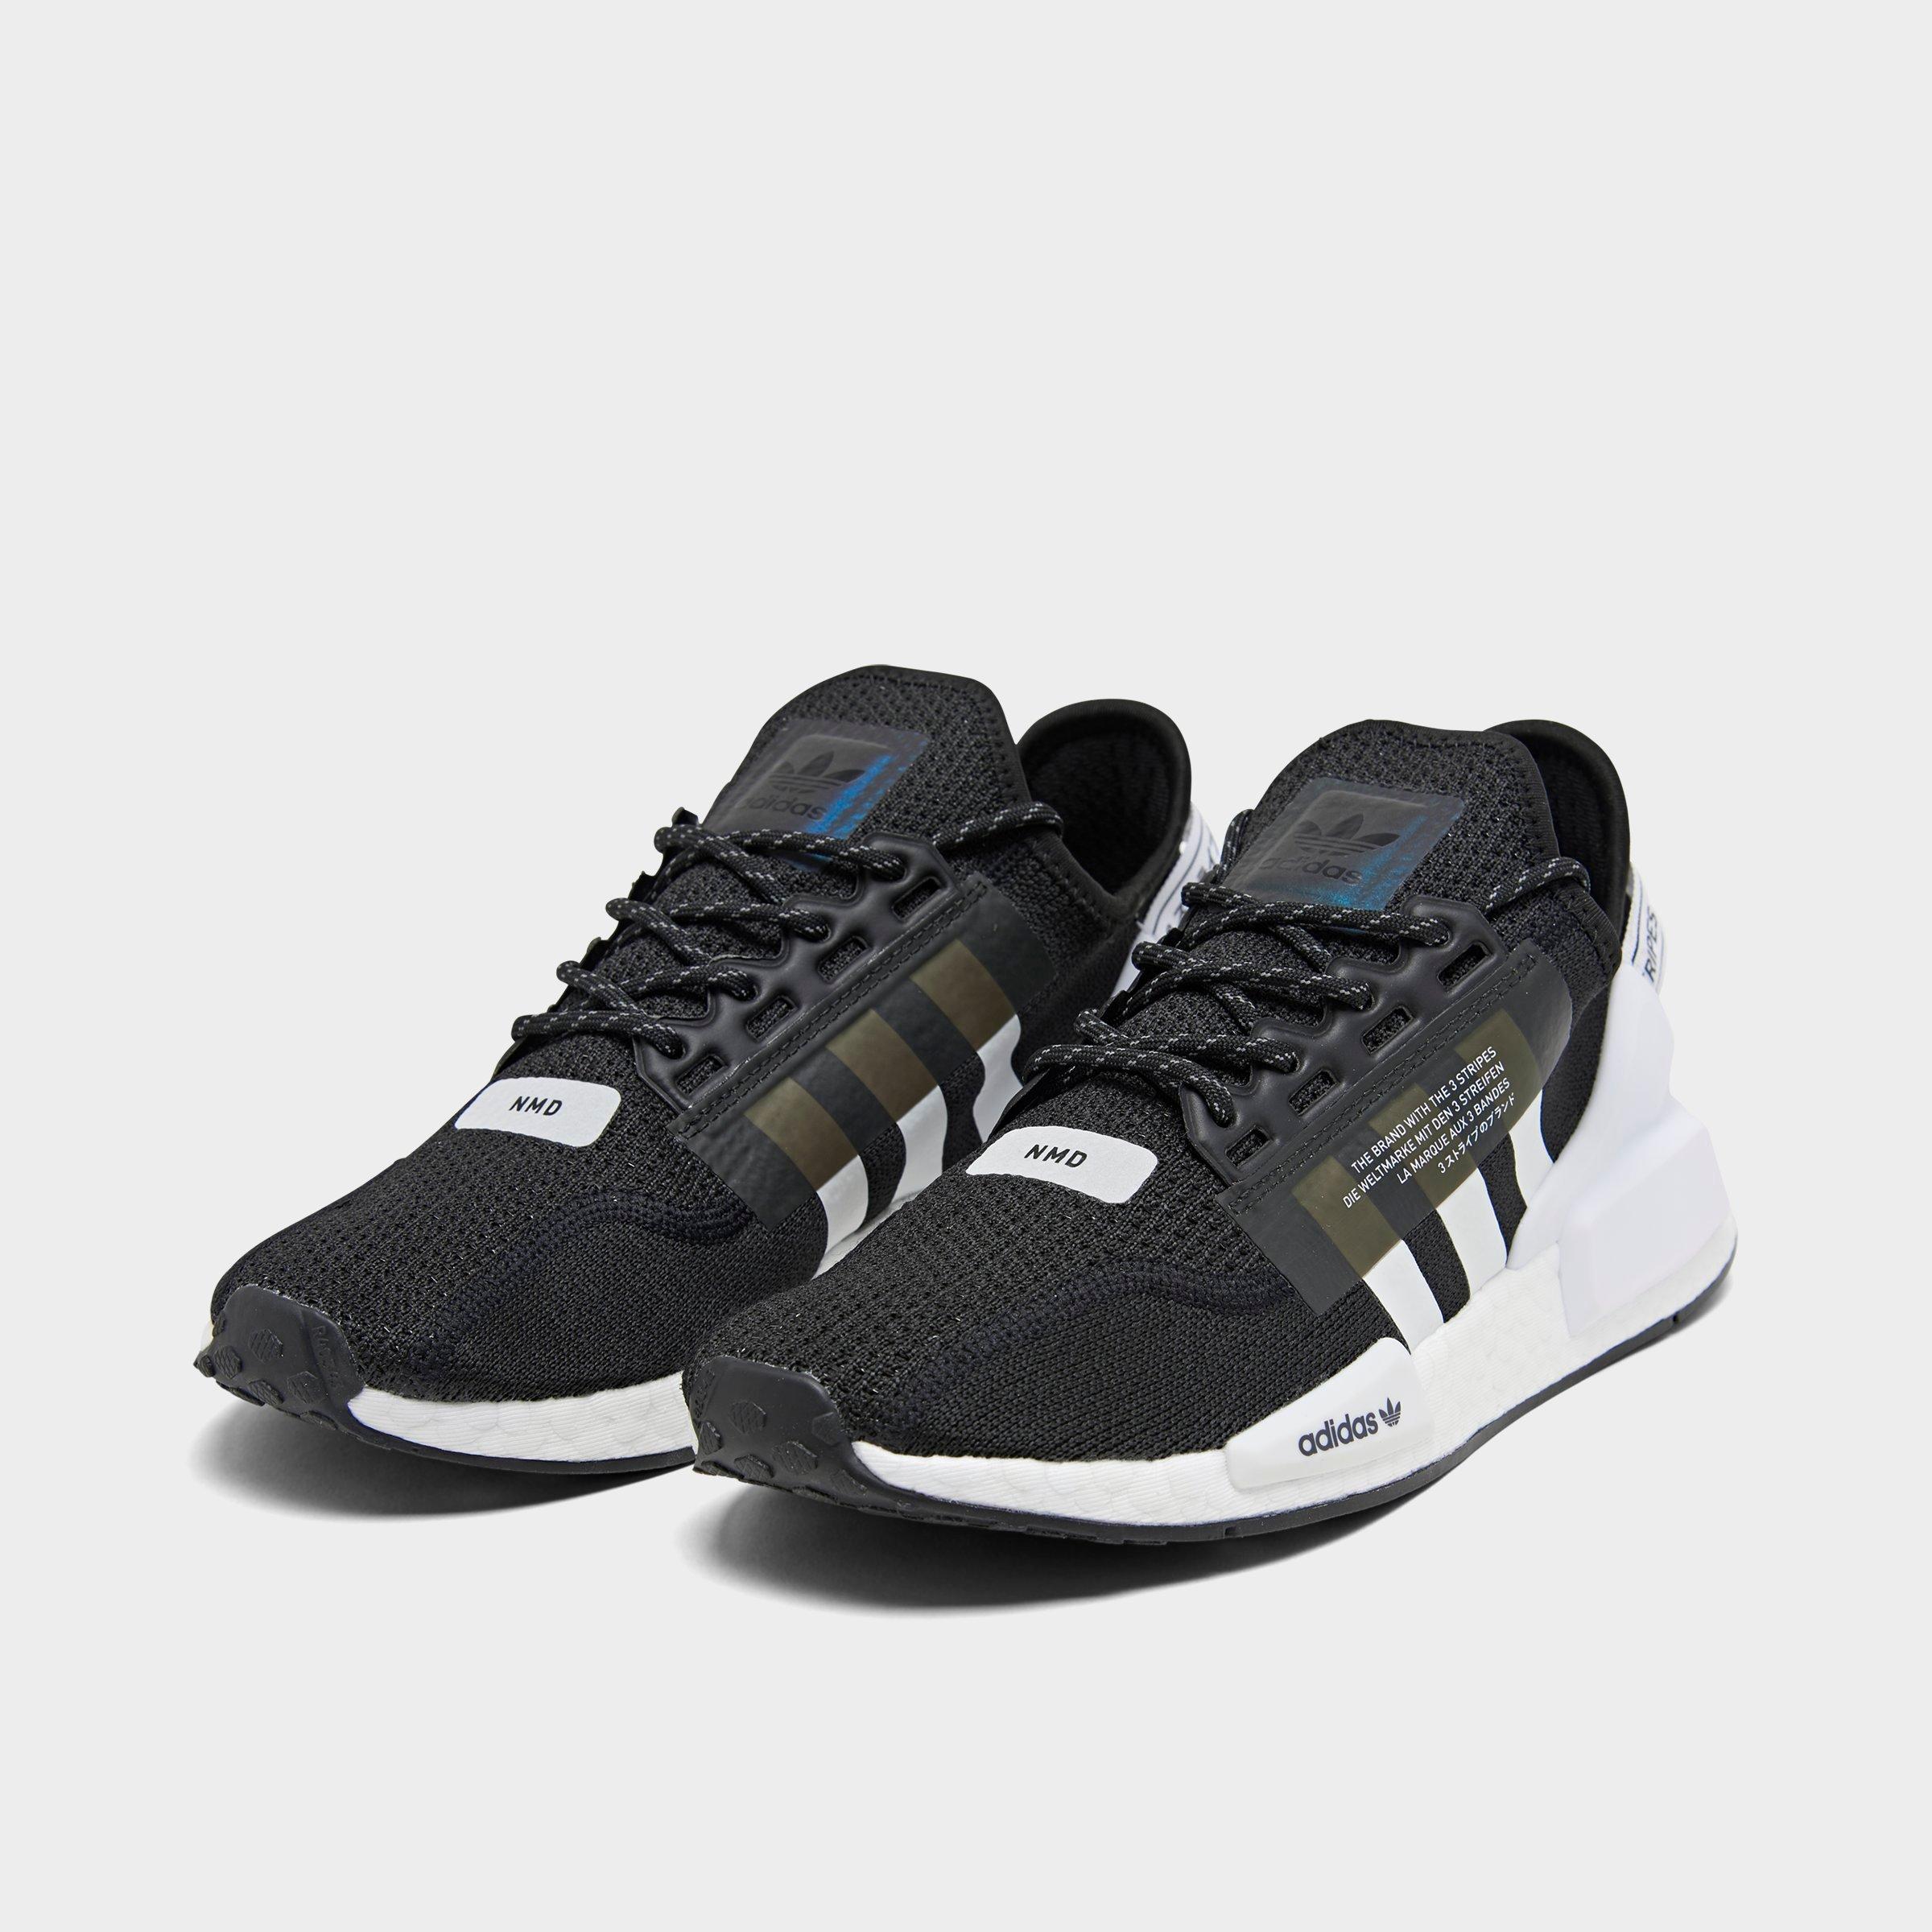 Details about WoMens Adidas NMD R1 B37652 Pinterest